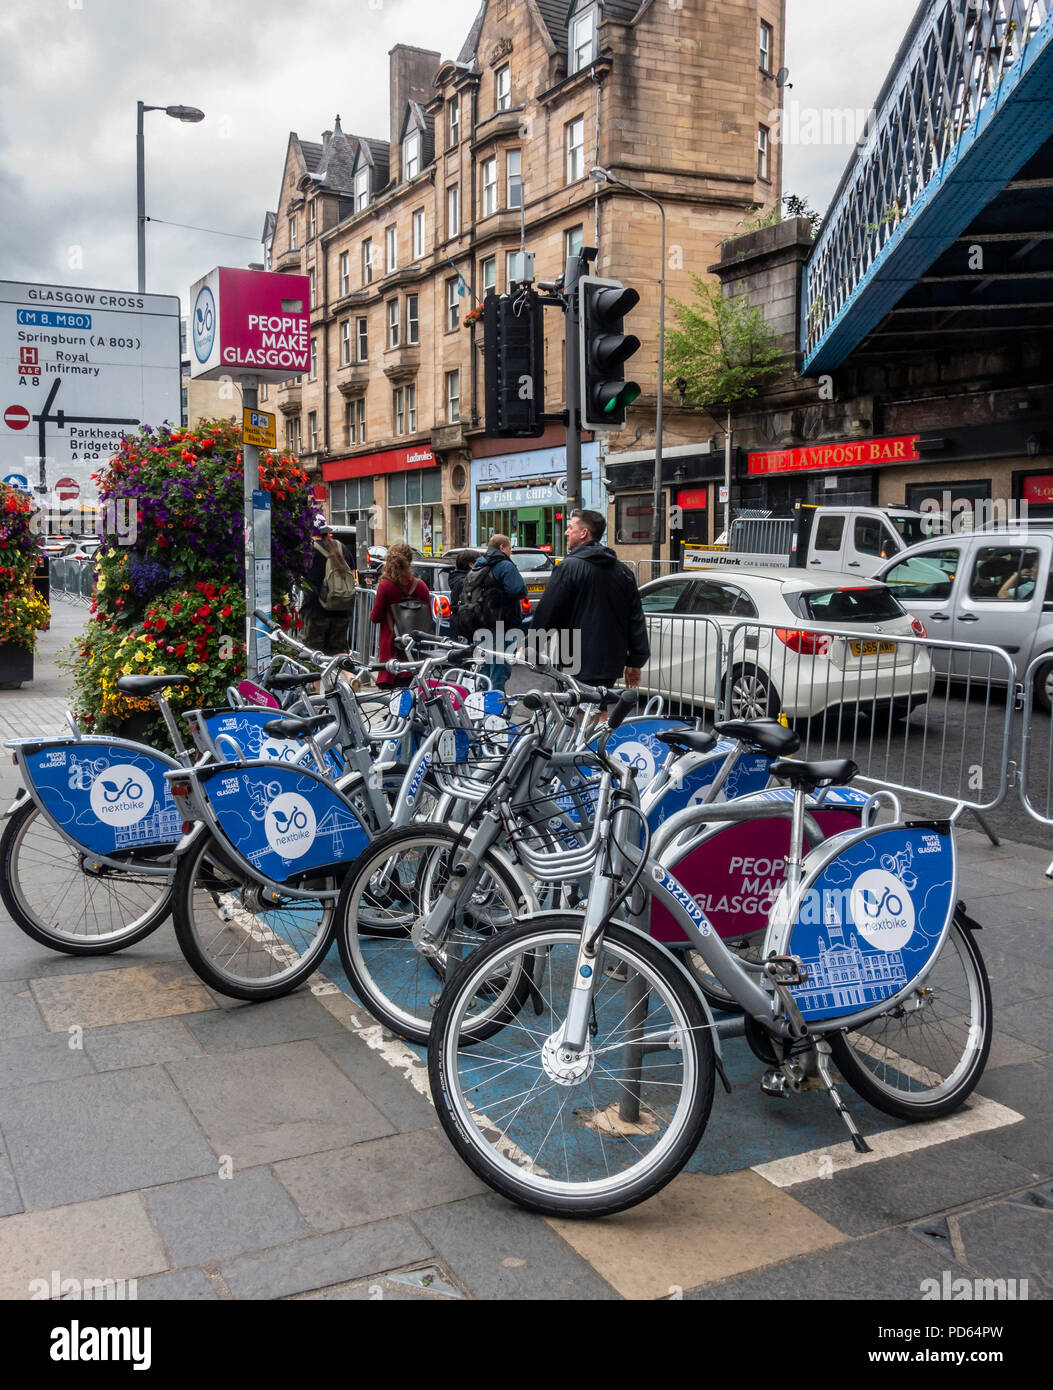 Nextbike bike sharing hire point in Saltmarket, near Glasgow Cross in the East End of Glasgow, Scotland. Large flower planters. Street, direction sign Stock Photo